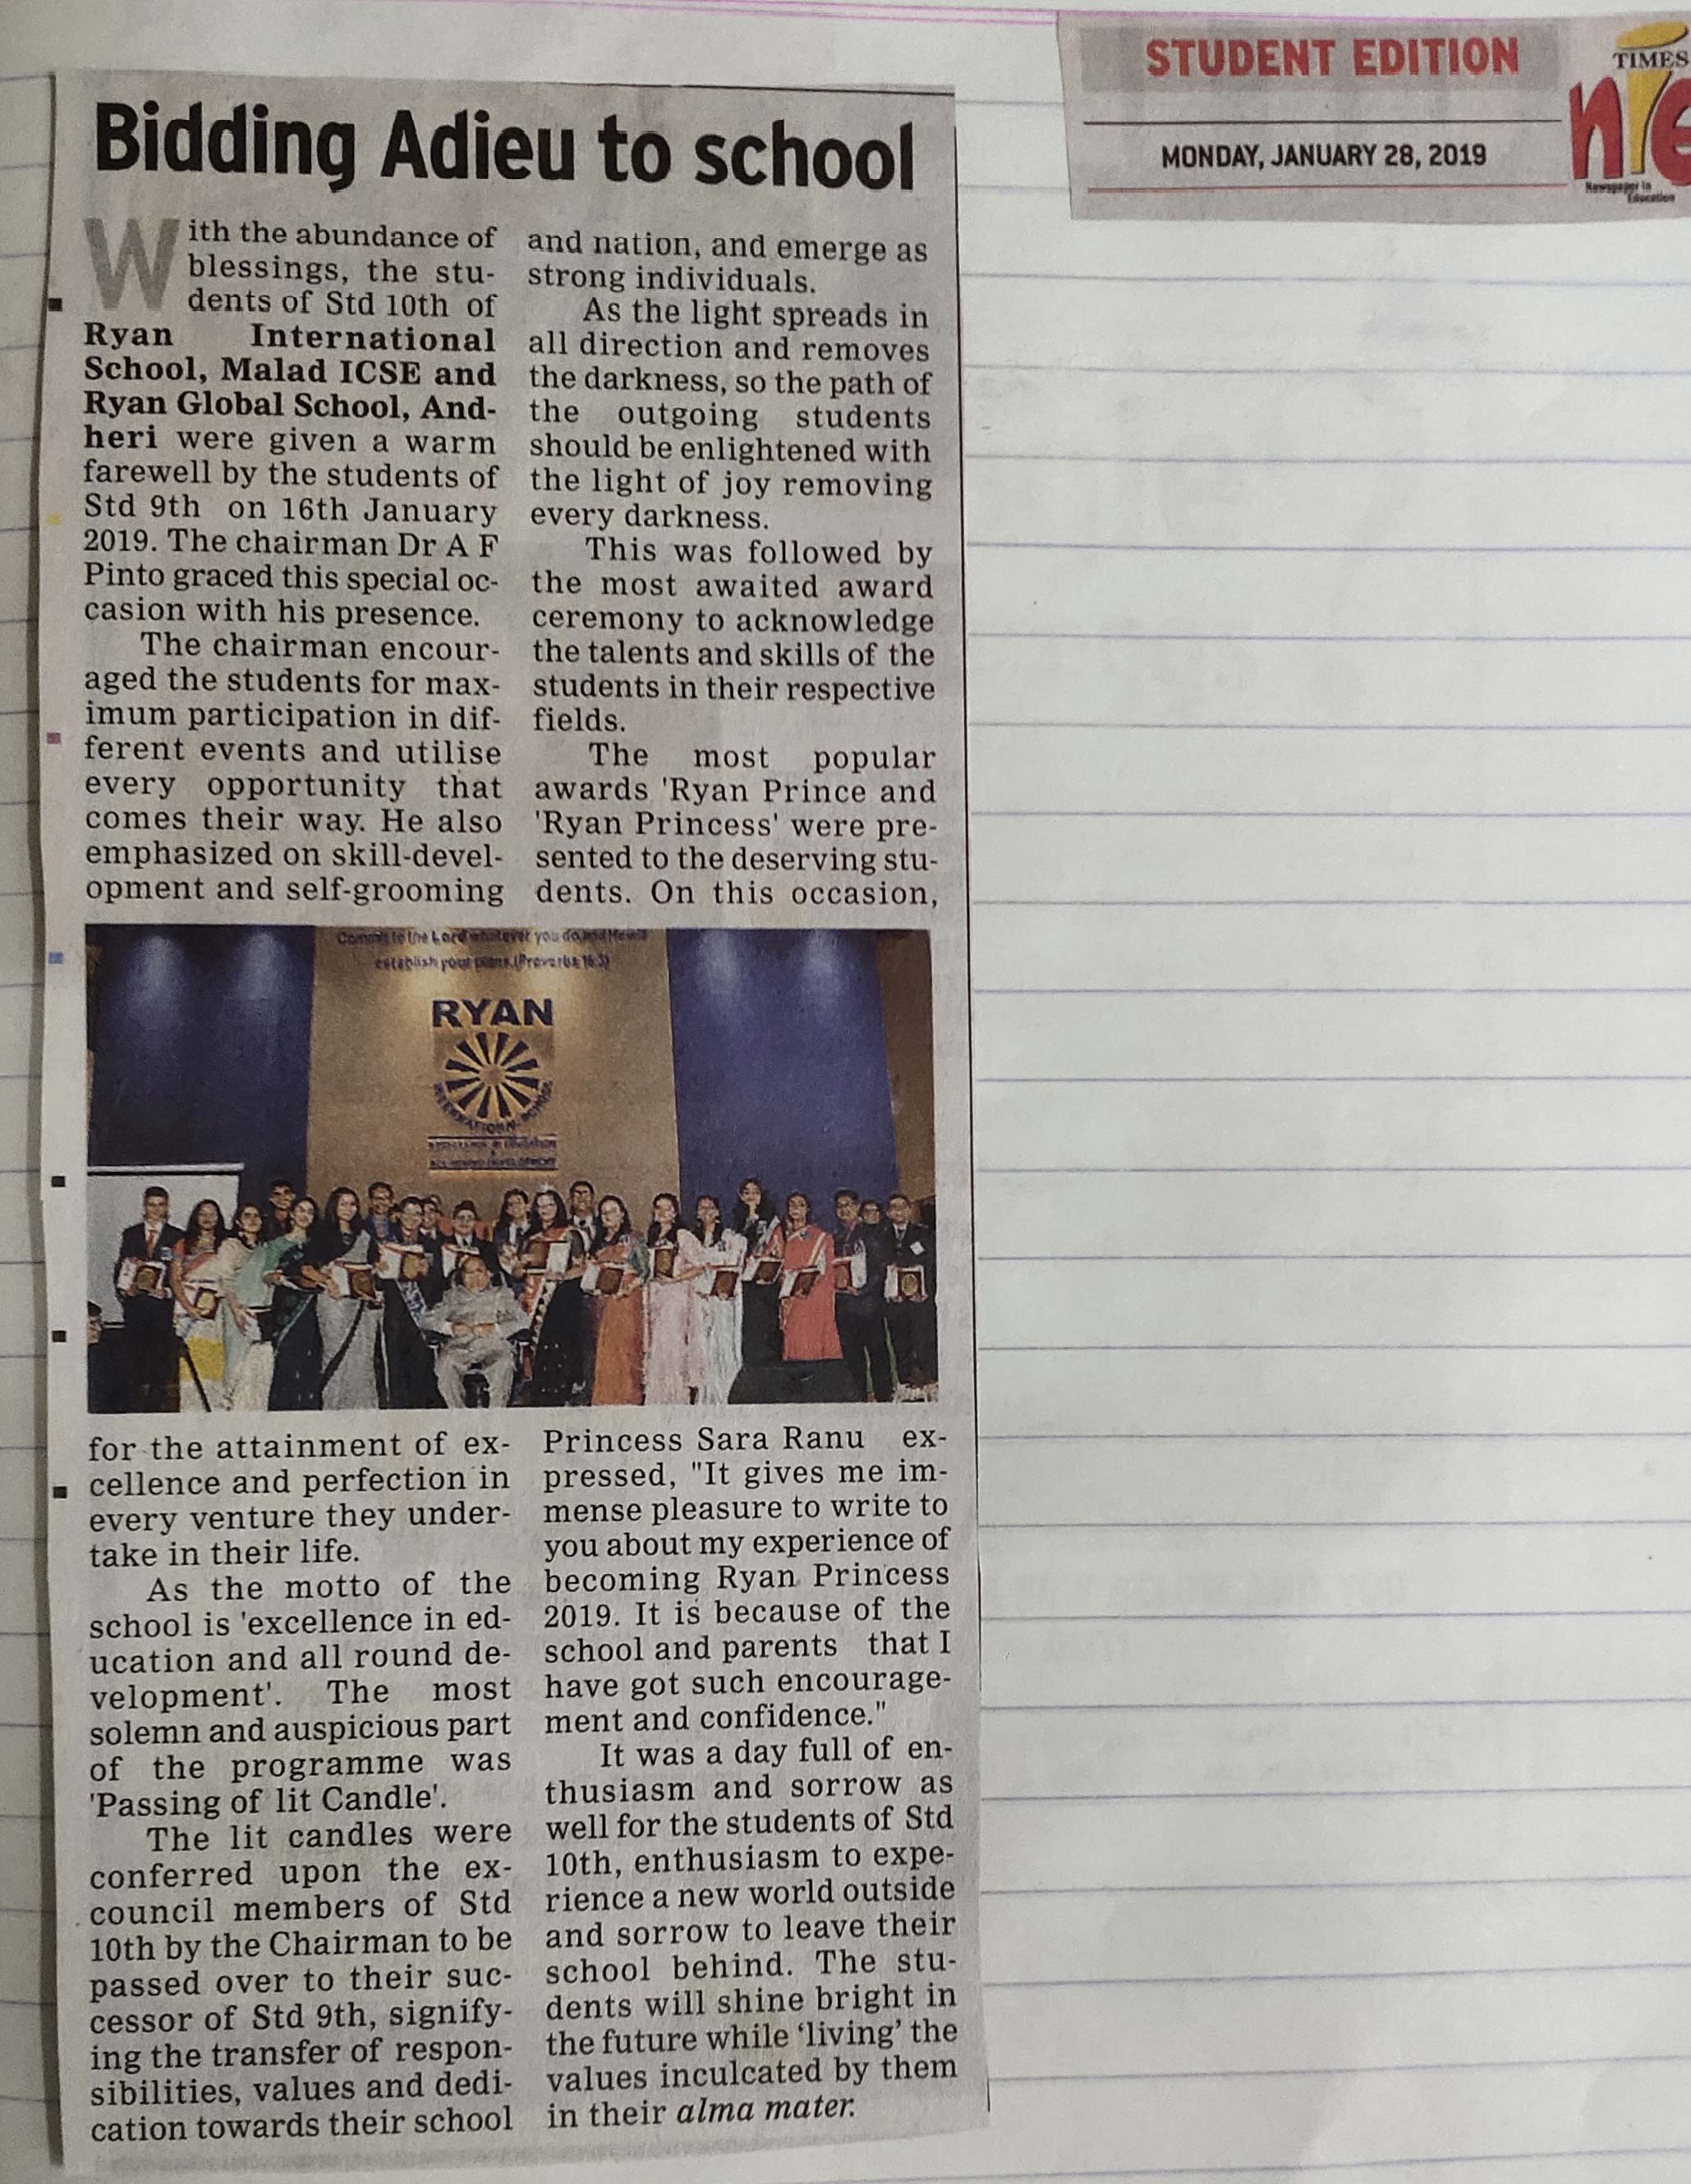 An article under the name “Adieu to School” was published in the Times of India